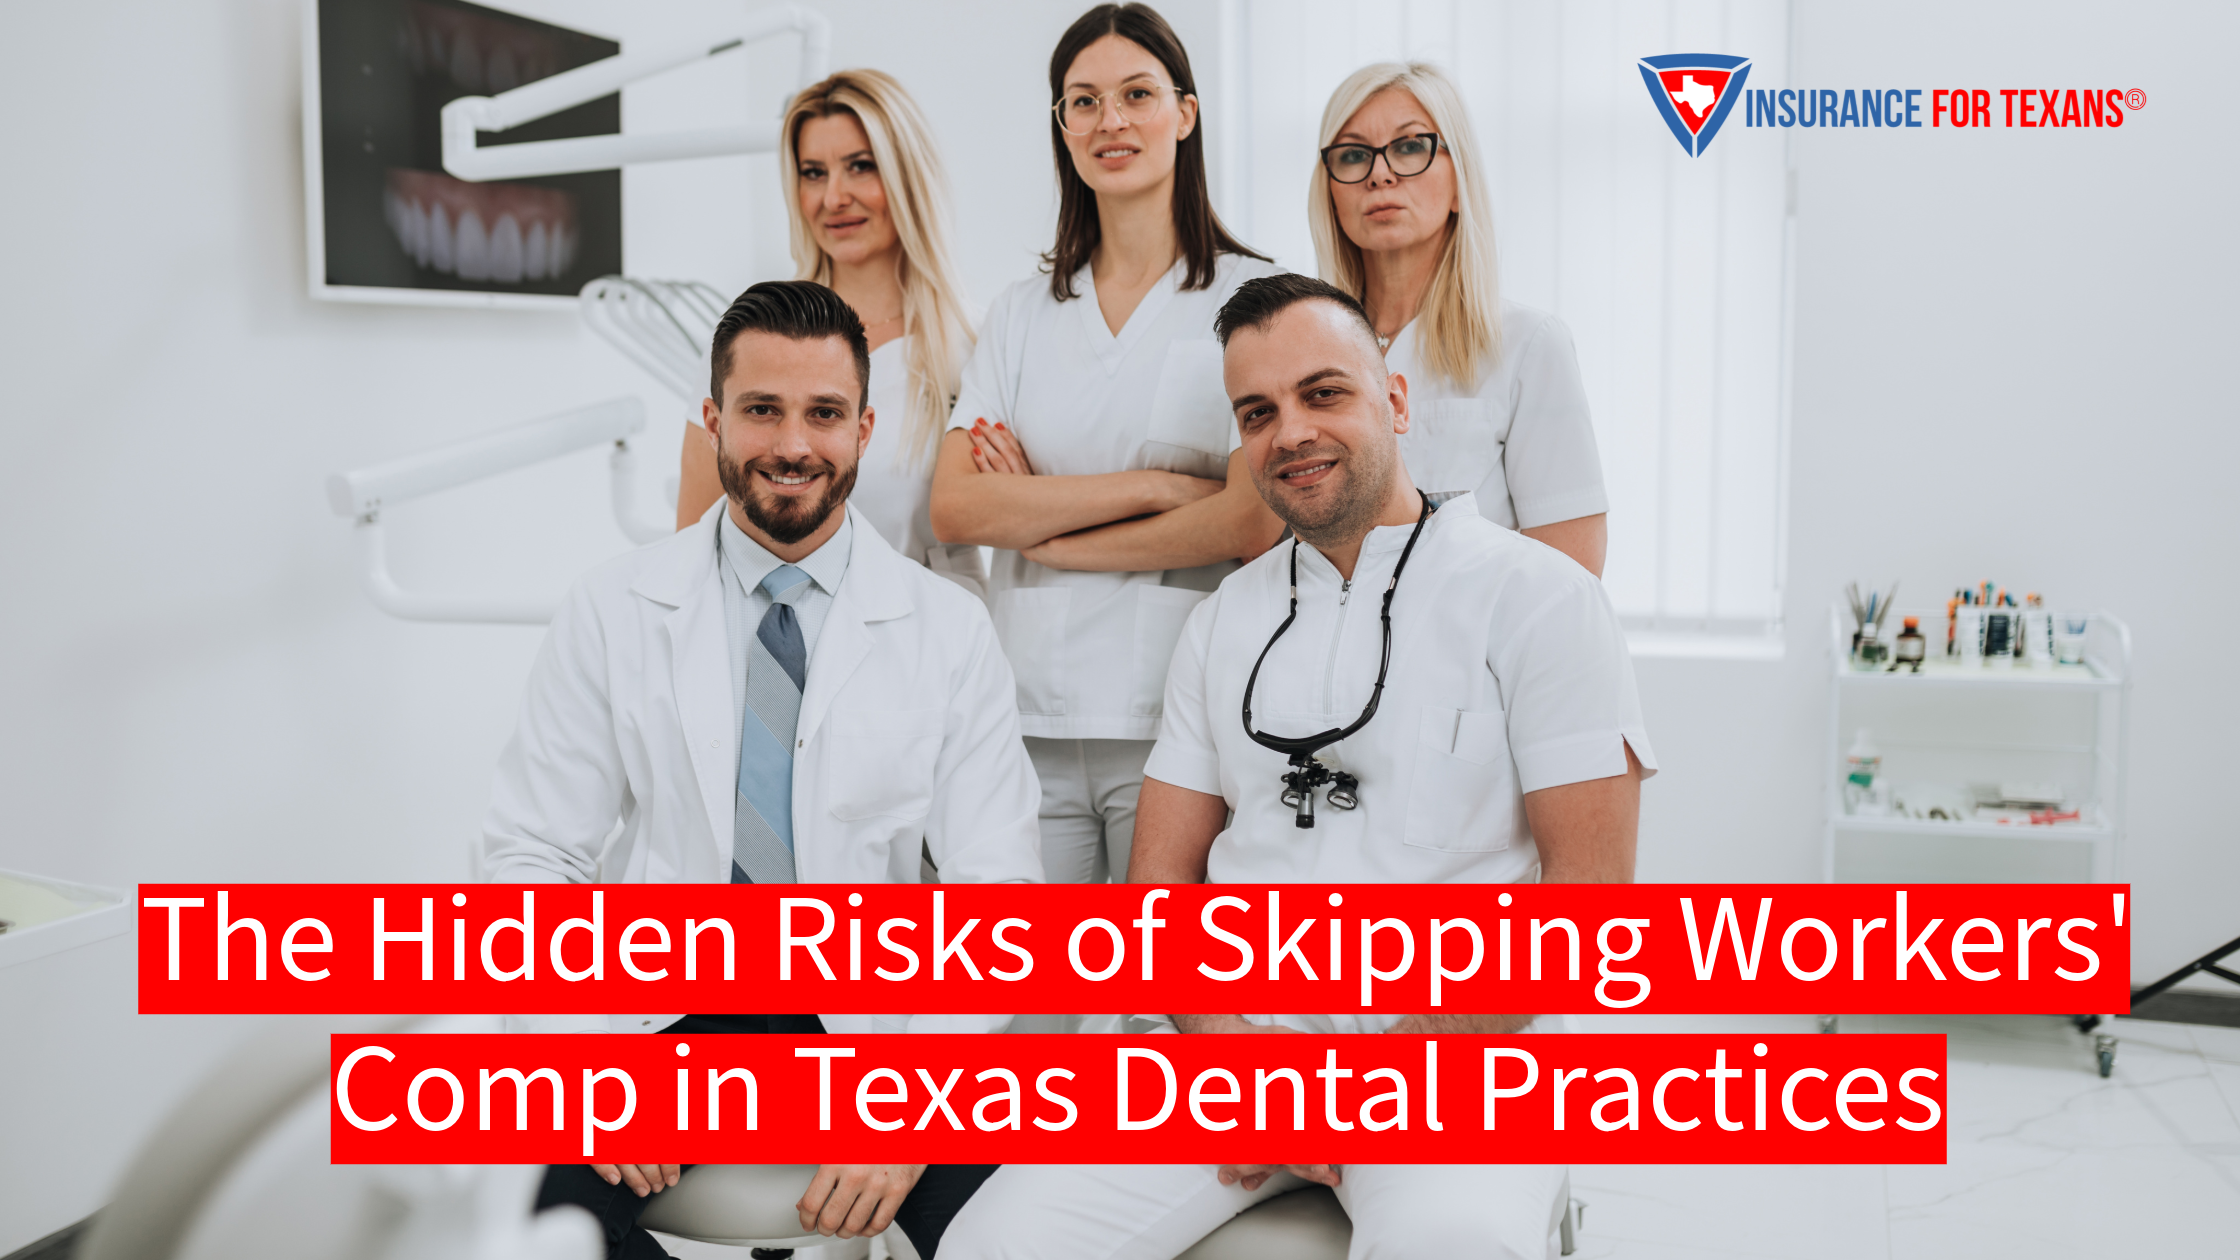 The Hidden Risks of Skipping Workers' Comp in Texas Dental Practices